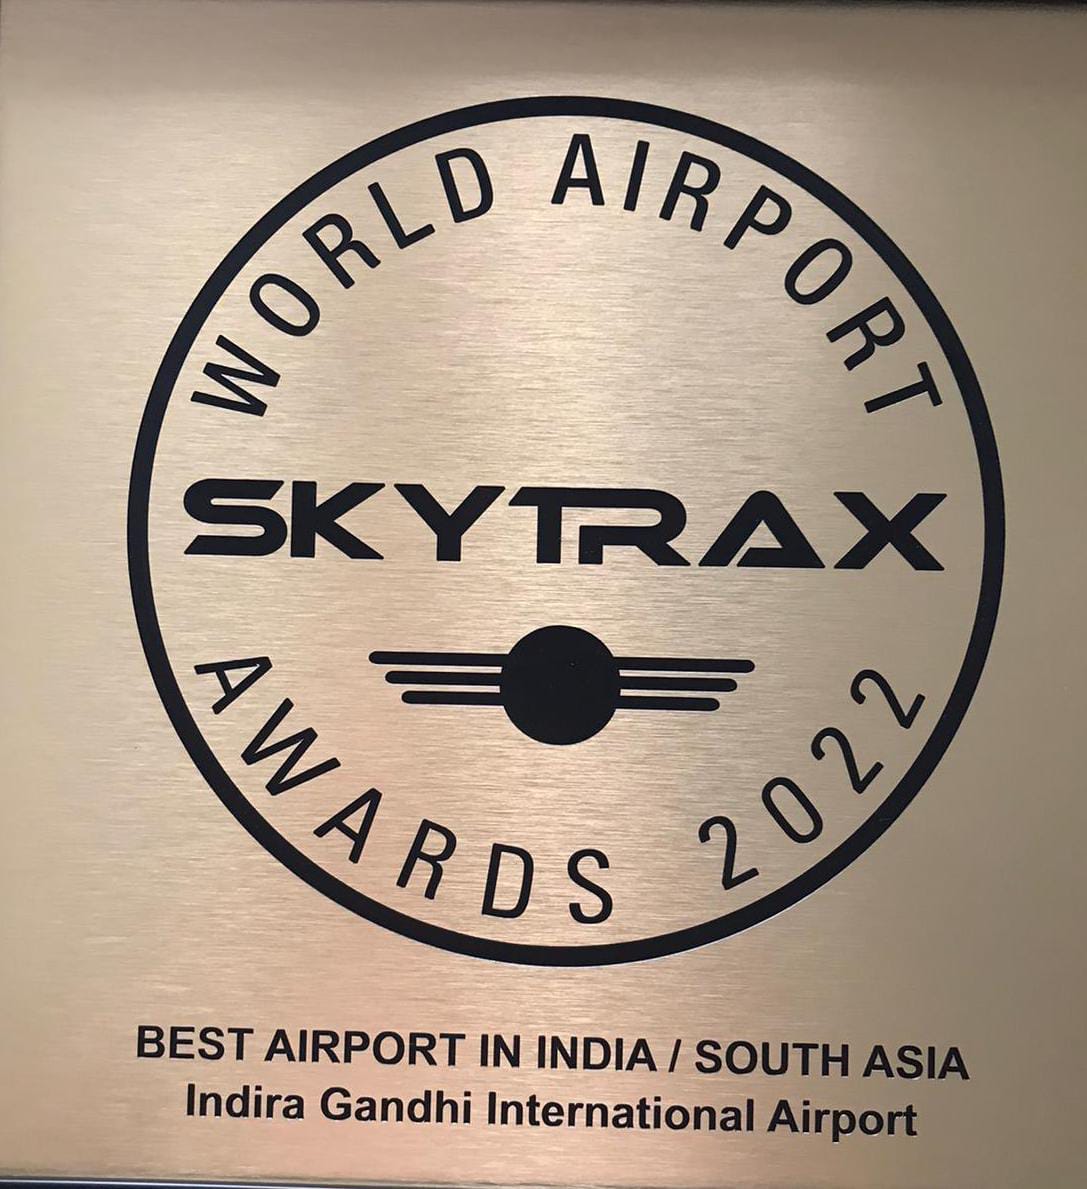 Delhi Airport adjudged as the ‘Best Airport in India & South Asia’ by Skytrax Wo…